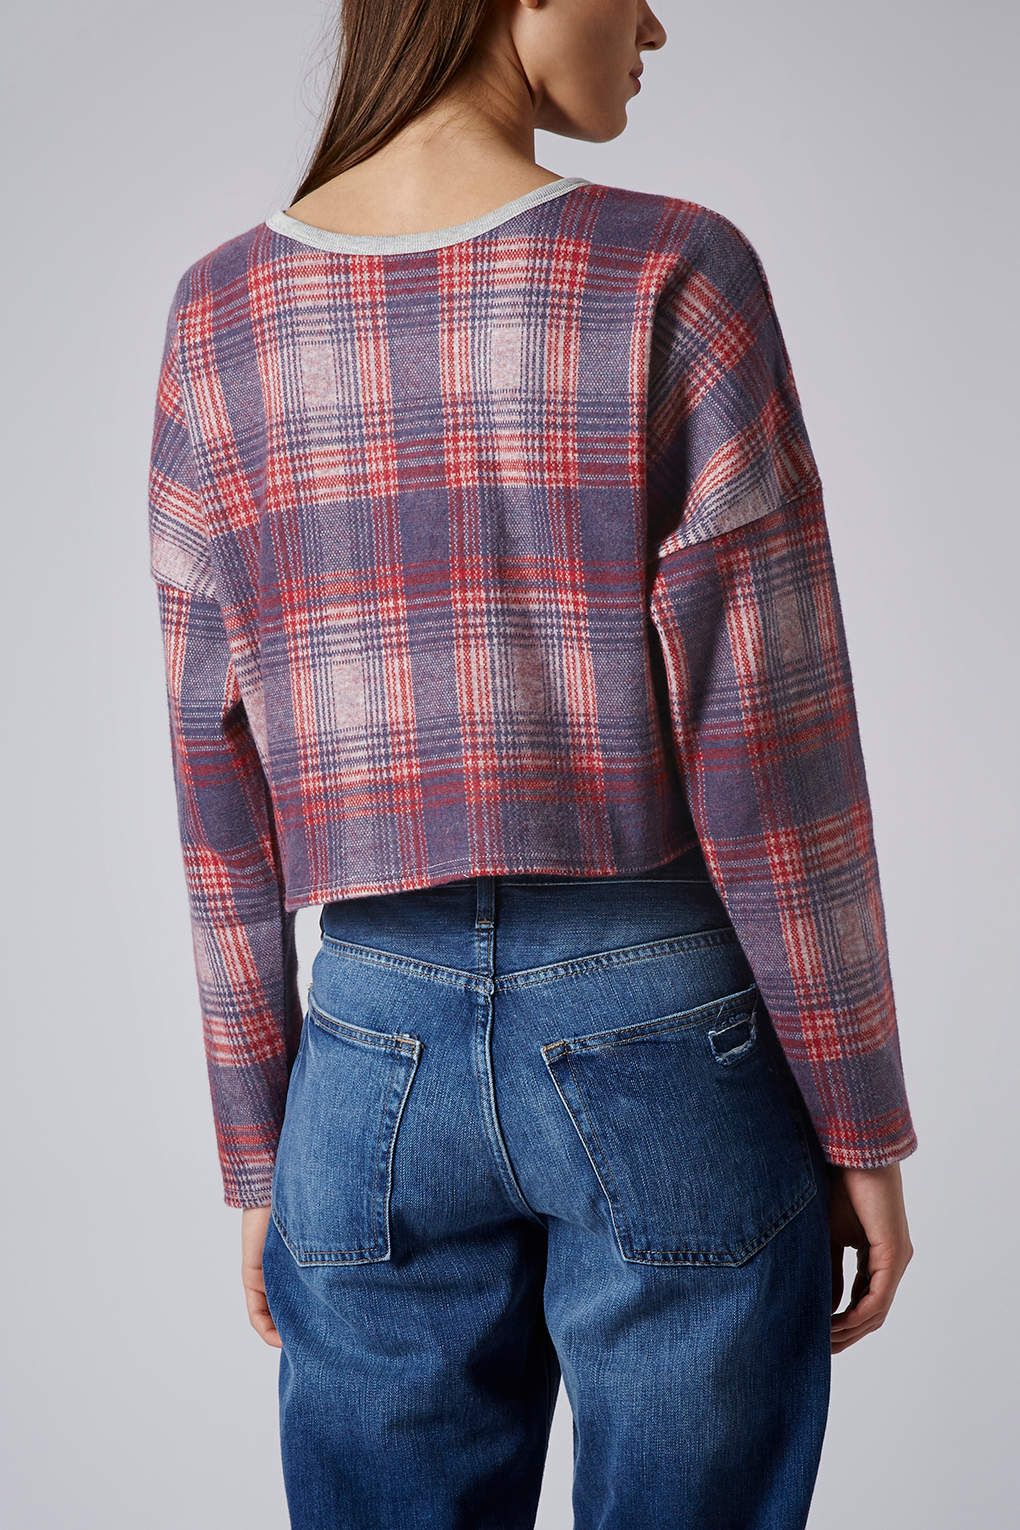 TOPSHOP Laundry Check Sweat in Red - Lyst